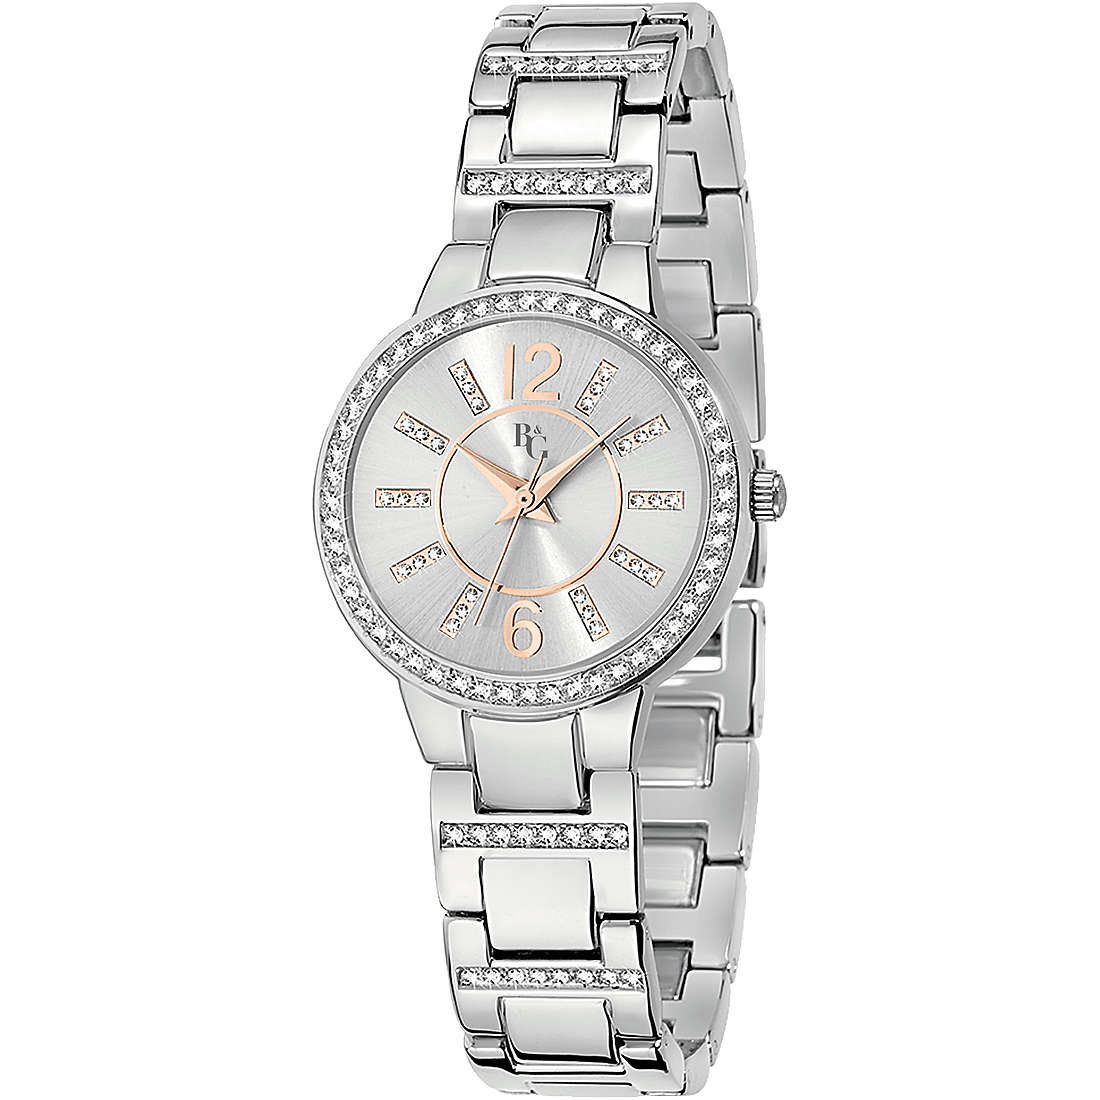 only time watch Metal Silver dial woman Desiderio R3853247515